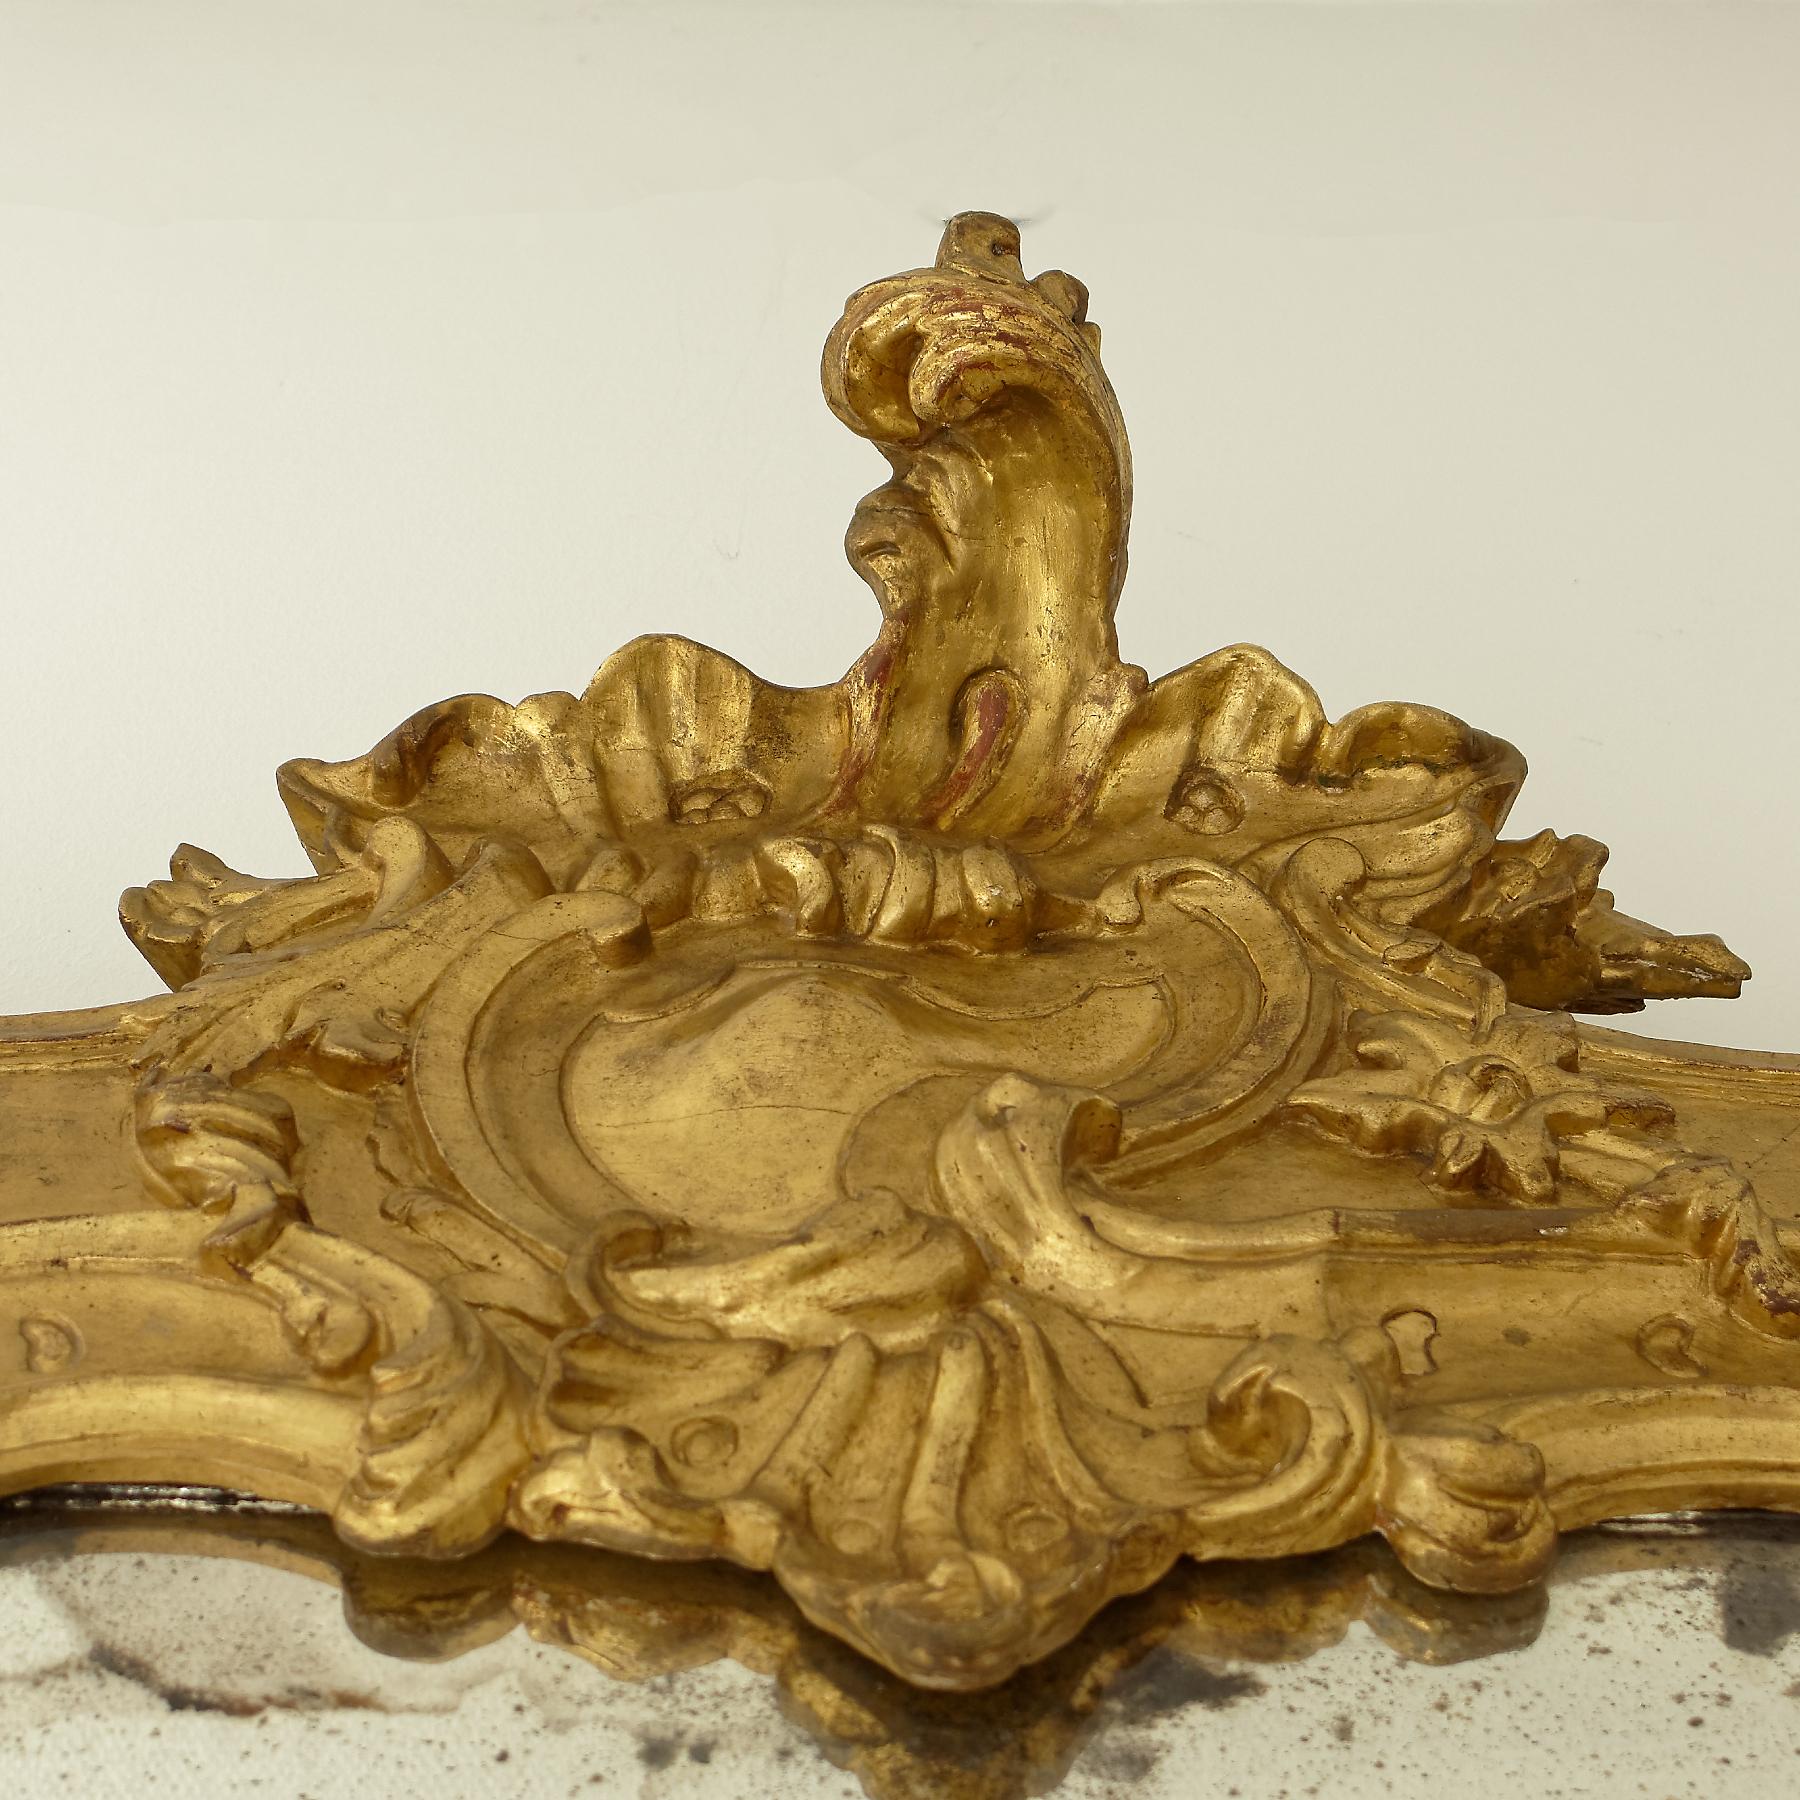 The large and very decorative mirror with a shaped rectangular divided plate, within an elaborately carved frame embellished with C-scrolls, rocaille and foliage, surmounted by a conformingly decorated whimsical rocaille cresting set with a further